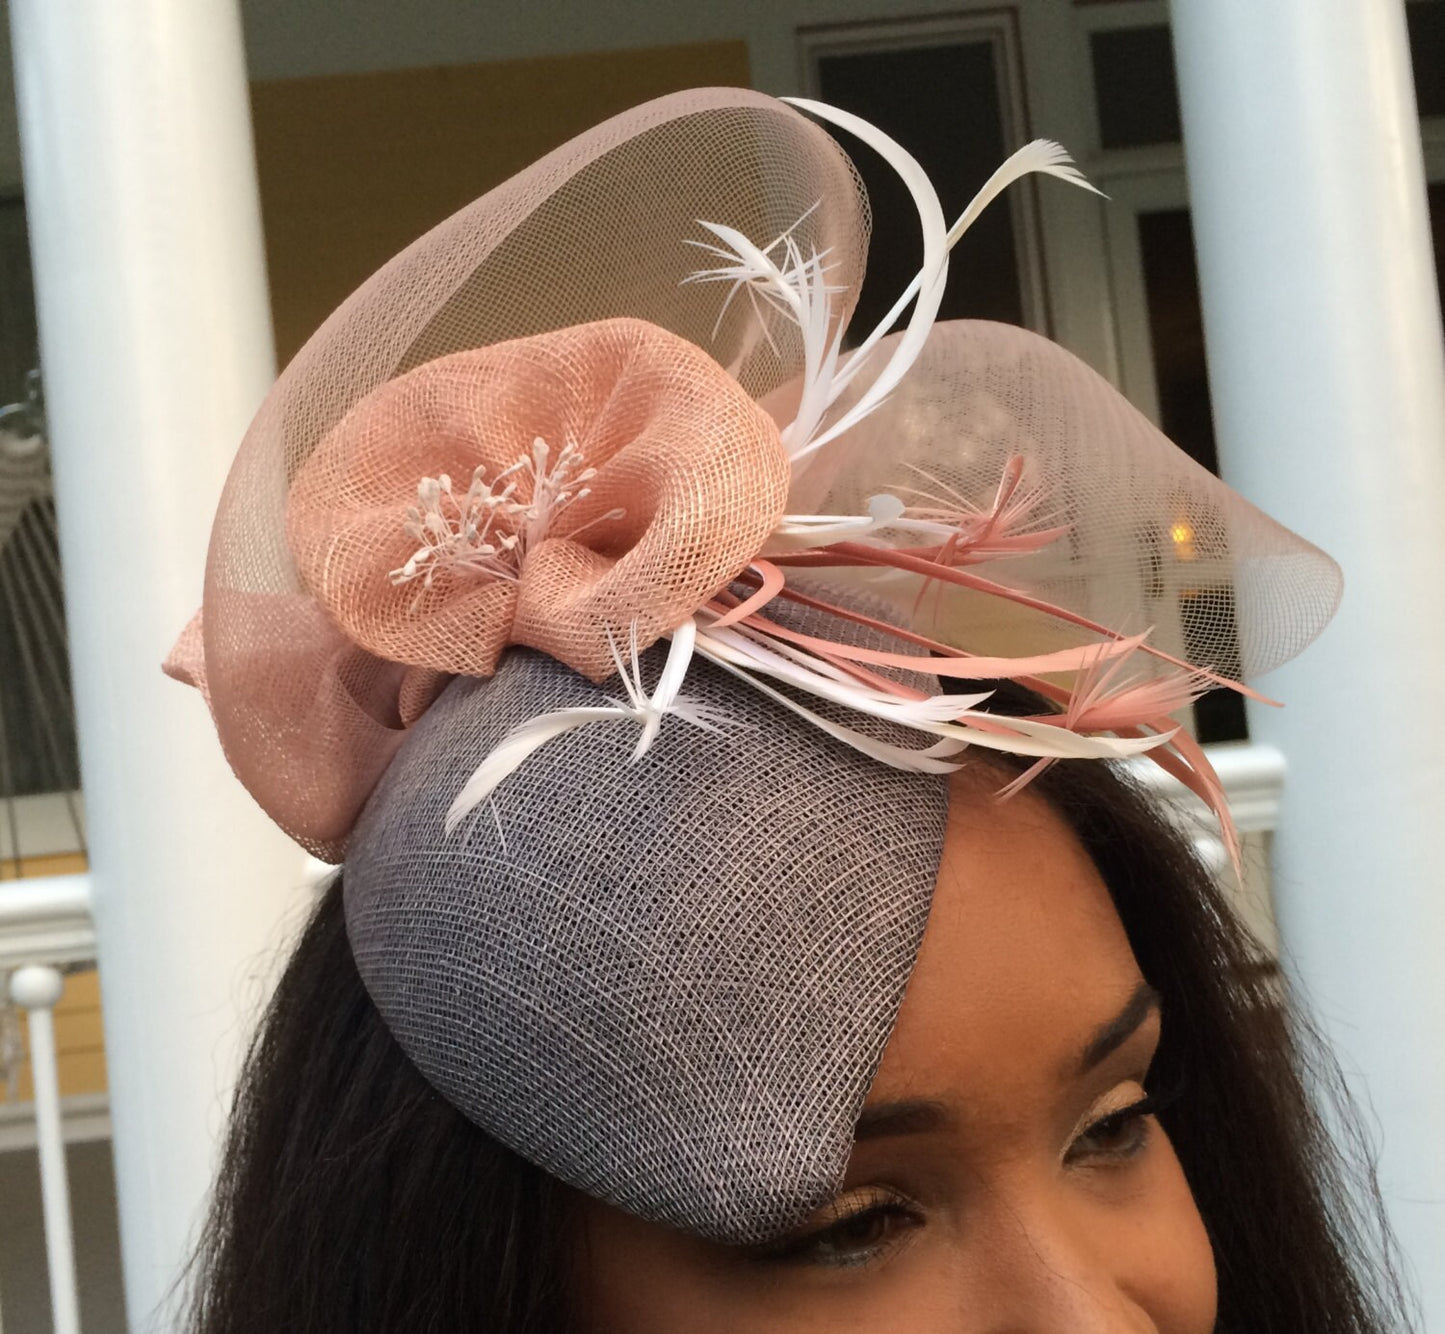 Mother of the Bride hat, Fascinator in grey and Peach with feathers--Bridal hat-Races Hat-Church Hat-Cocktail Hat, Royal Ascot, Derby hat!